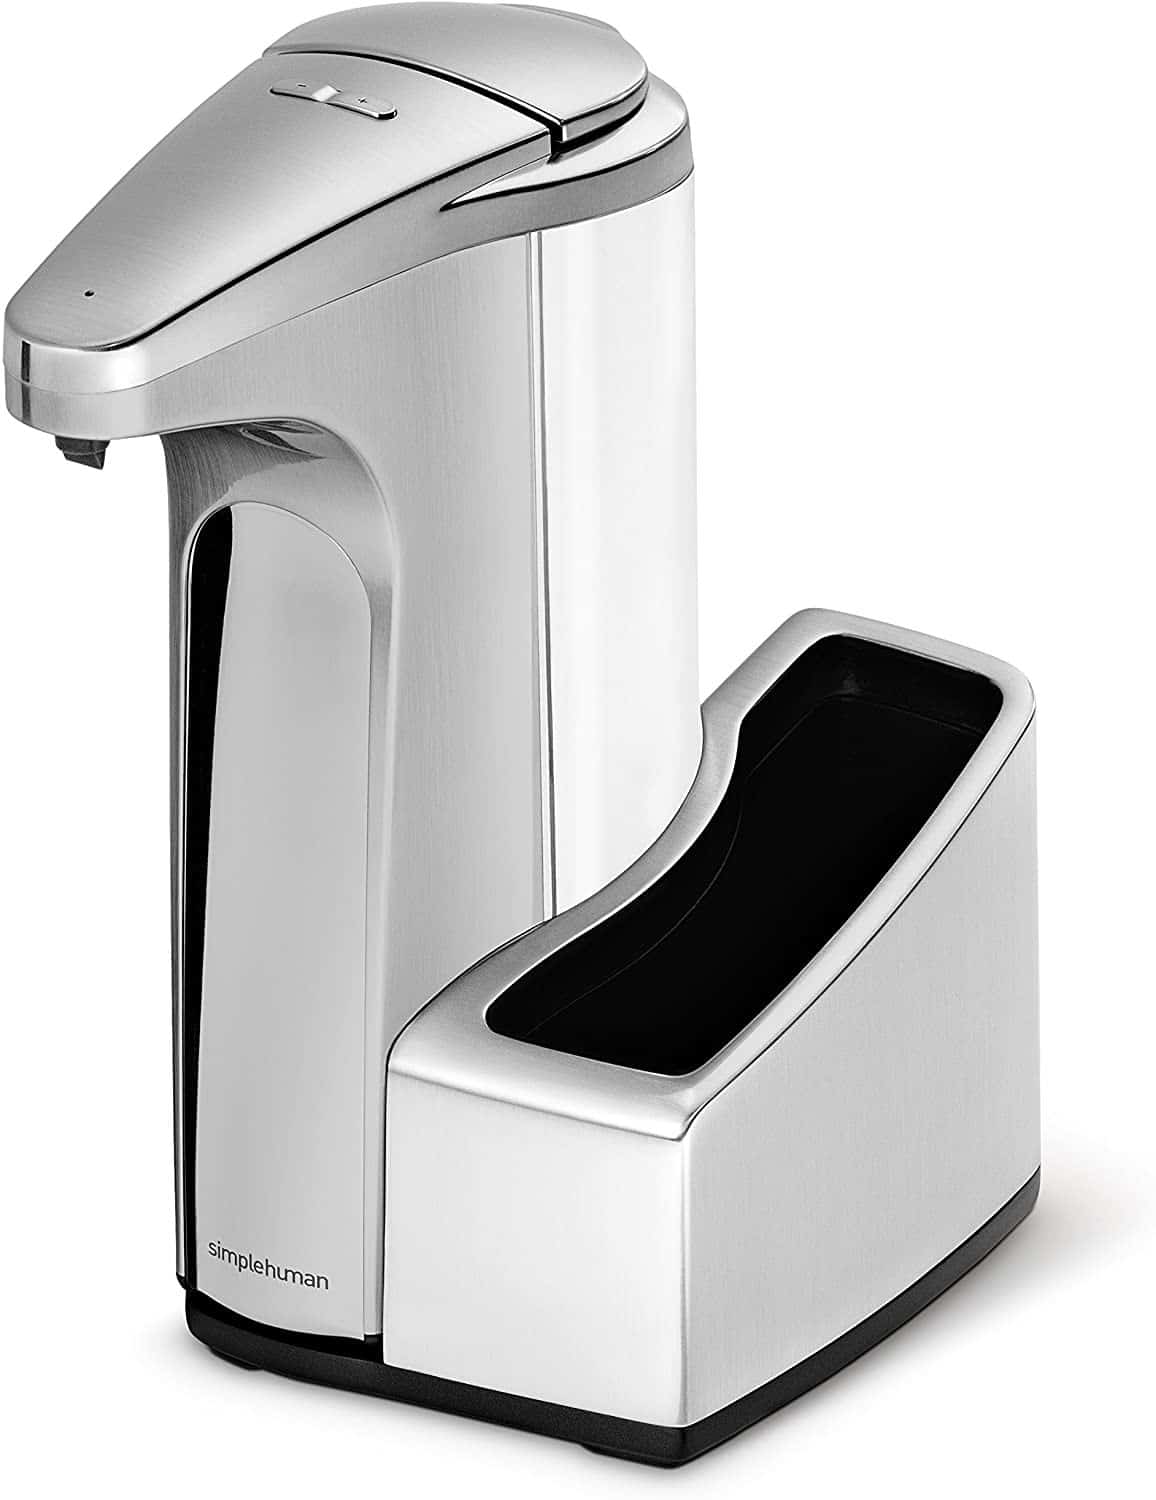 Simplehuman 13 oz. Touch-Free Automatic Soap Pump